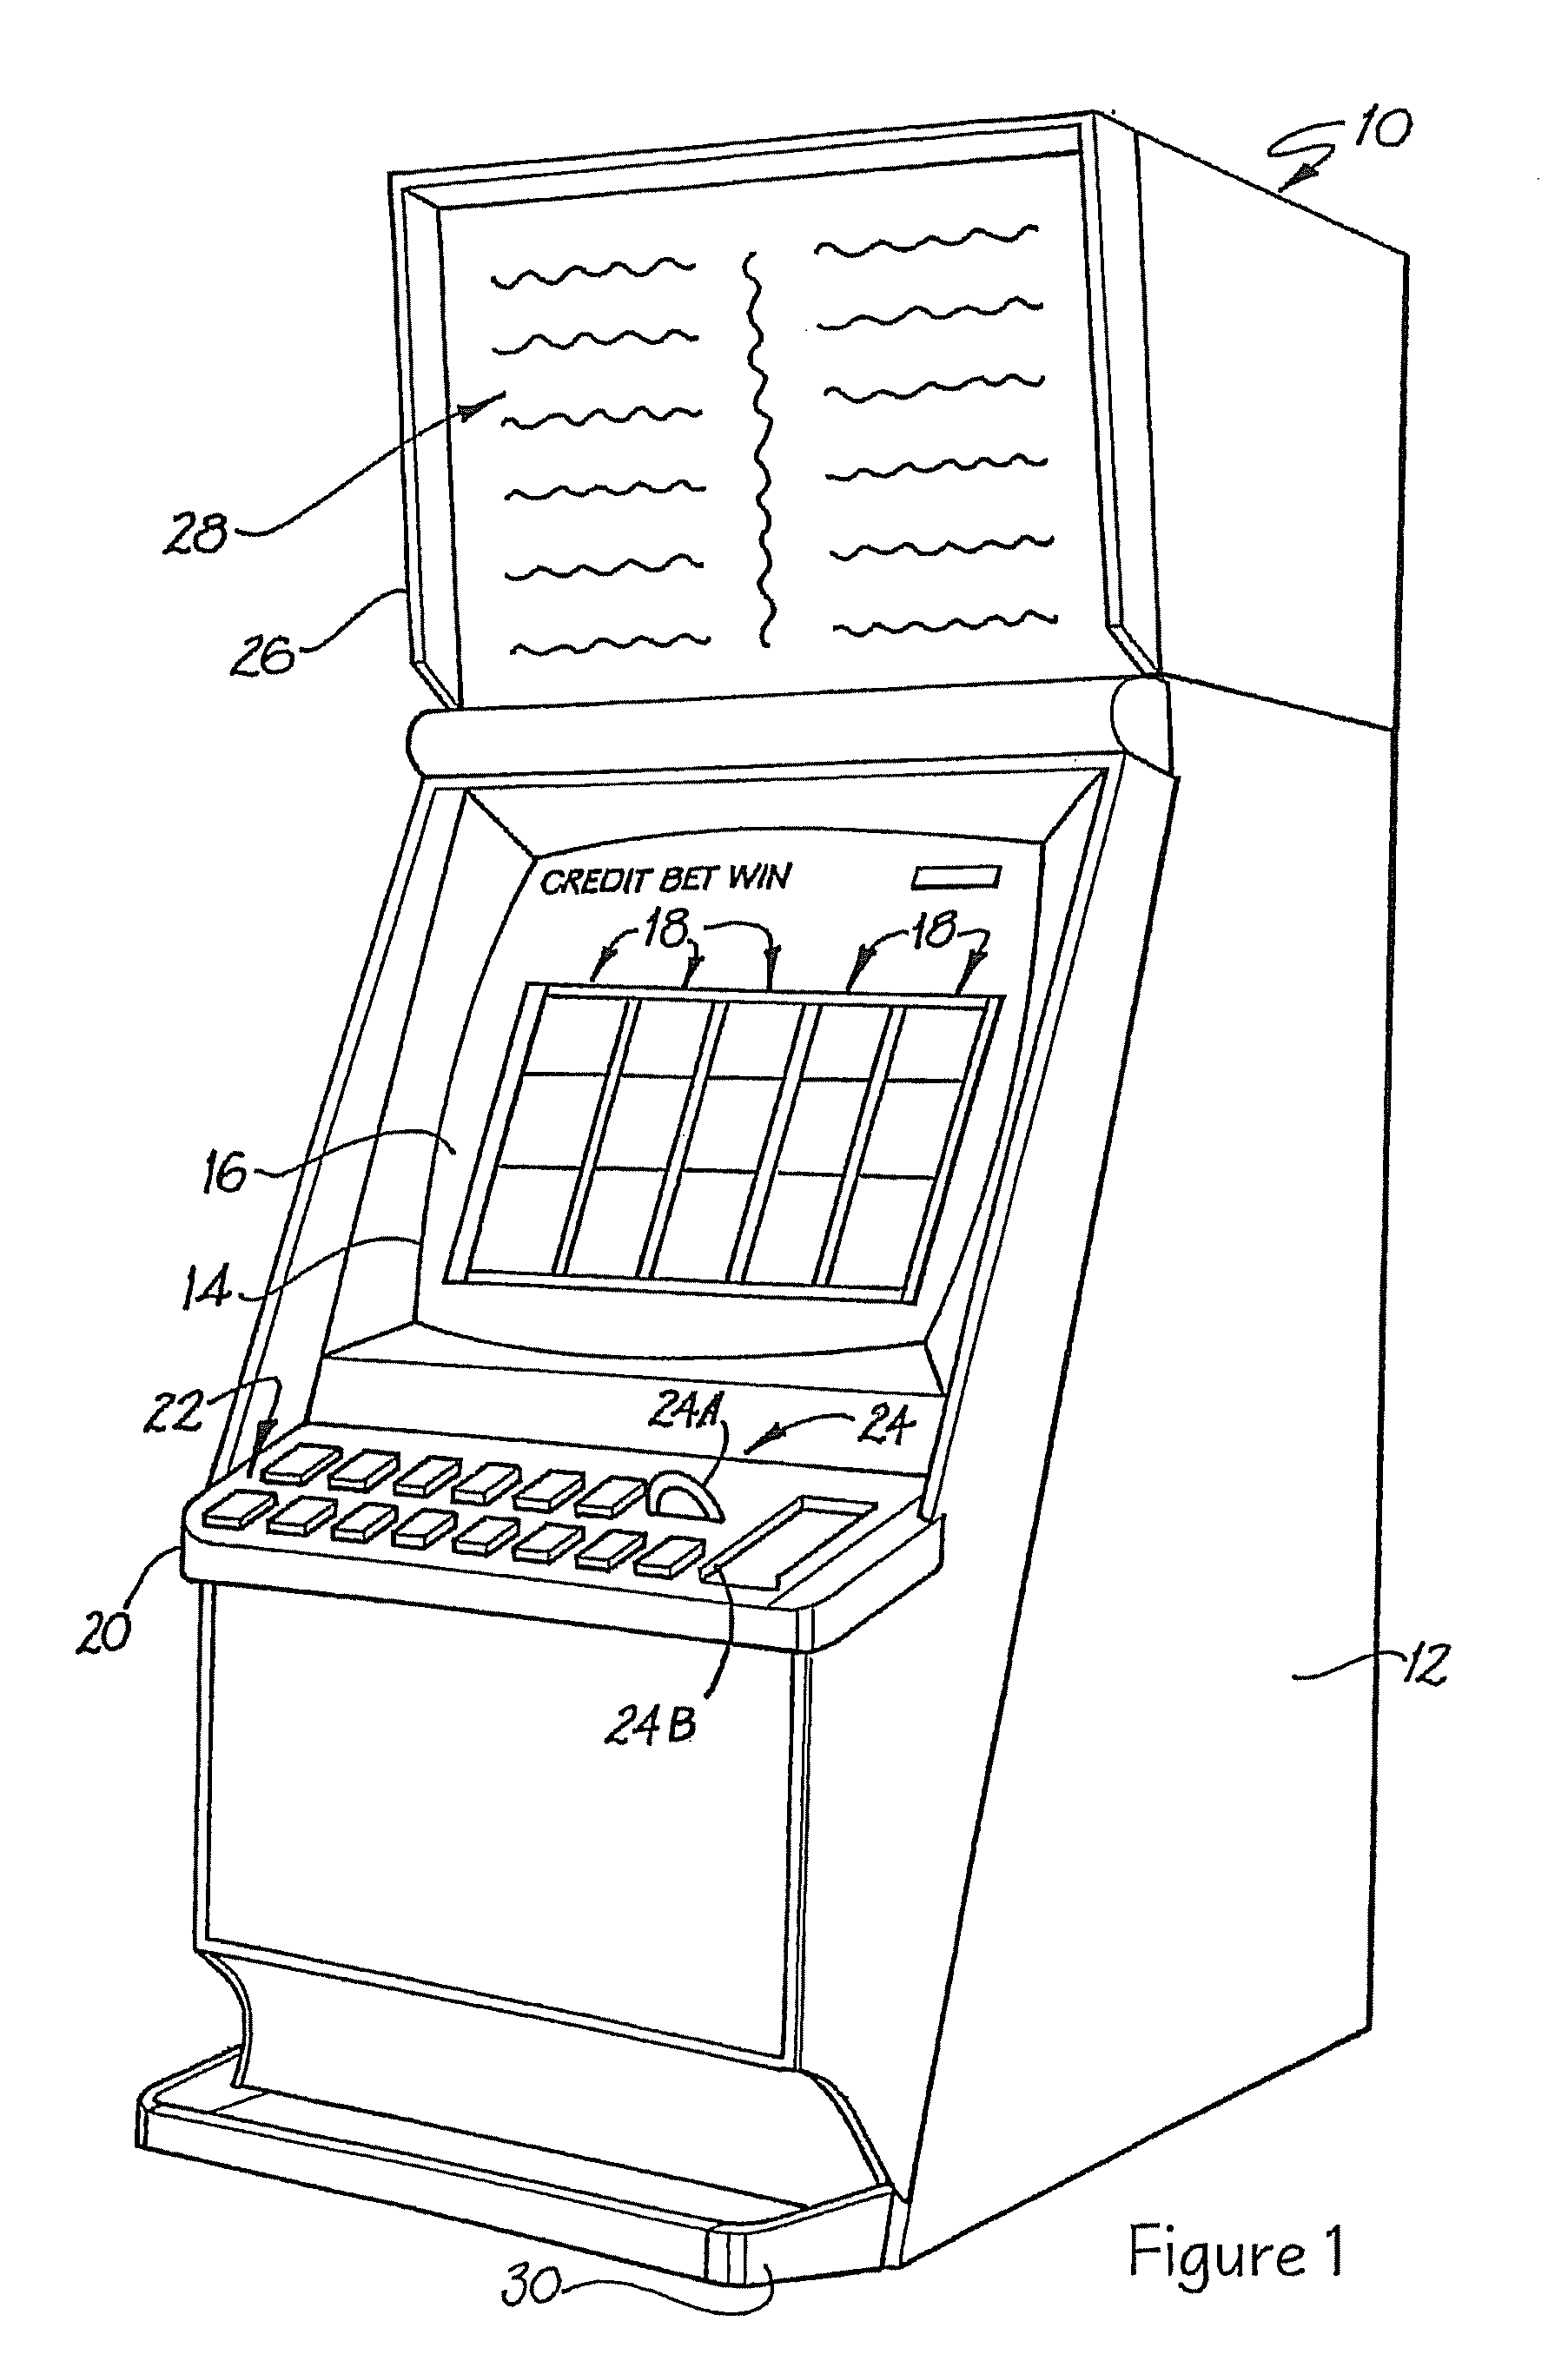 Gaming apparatus with a wheel game